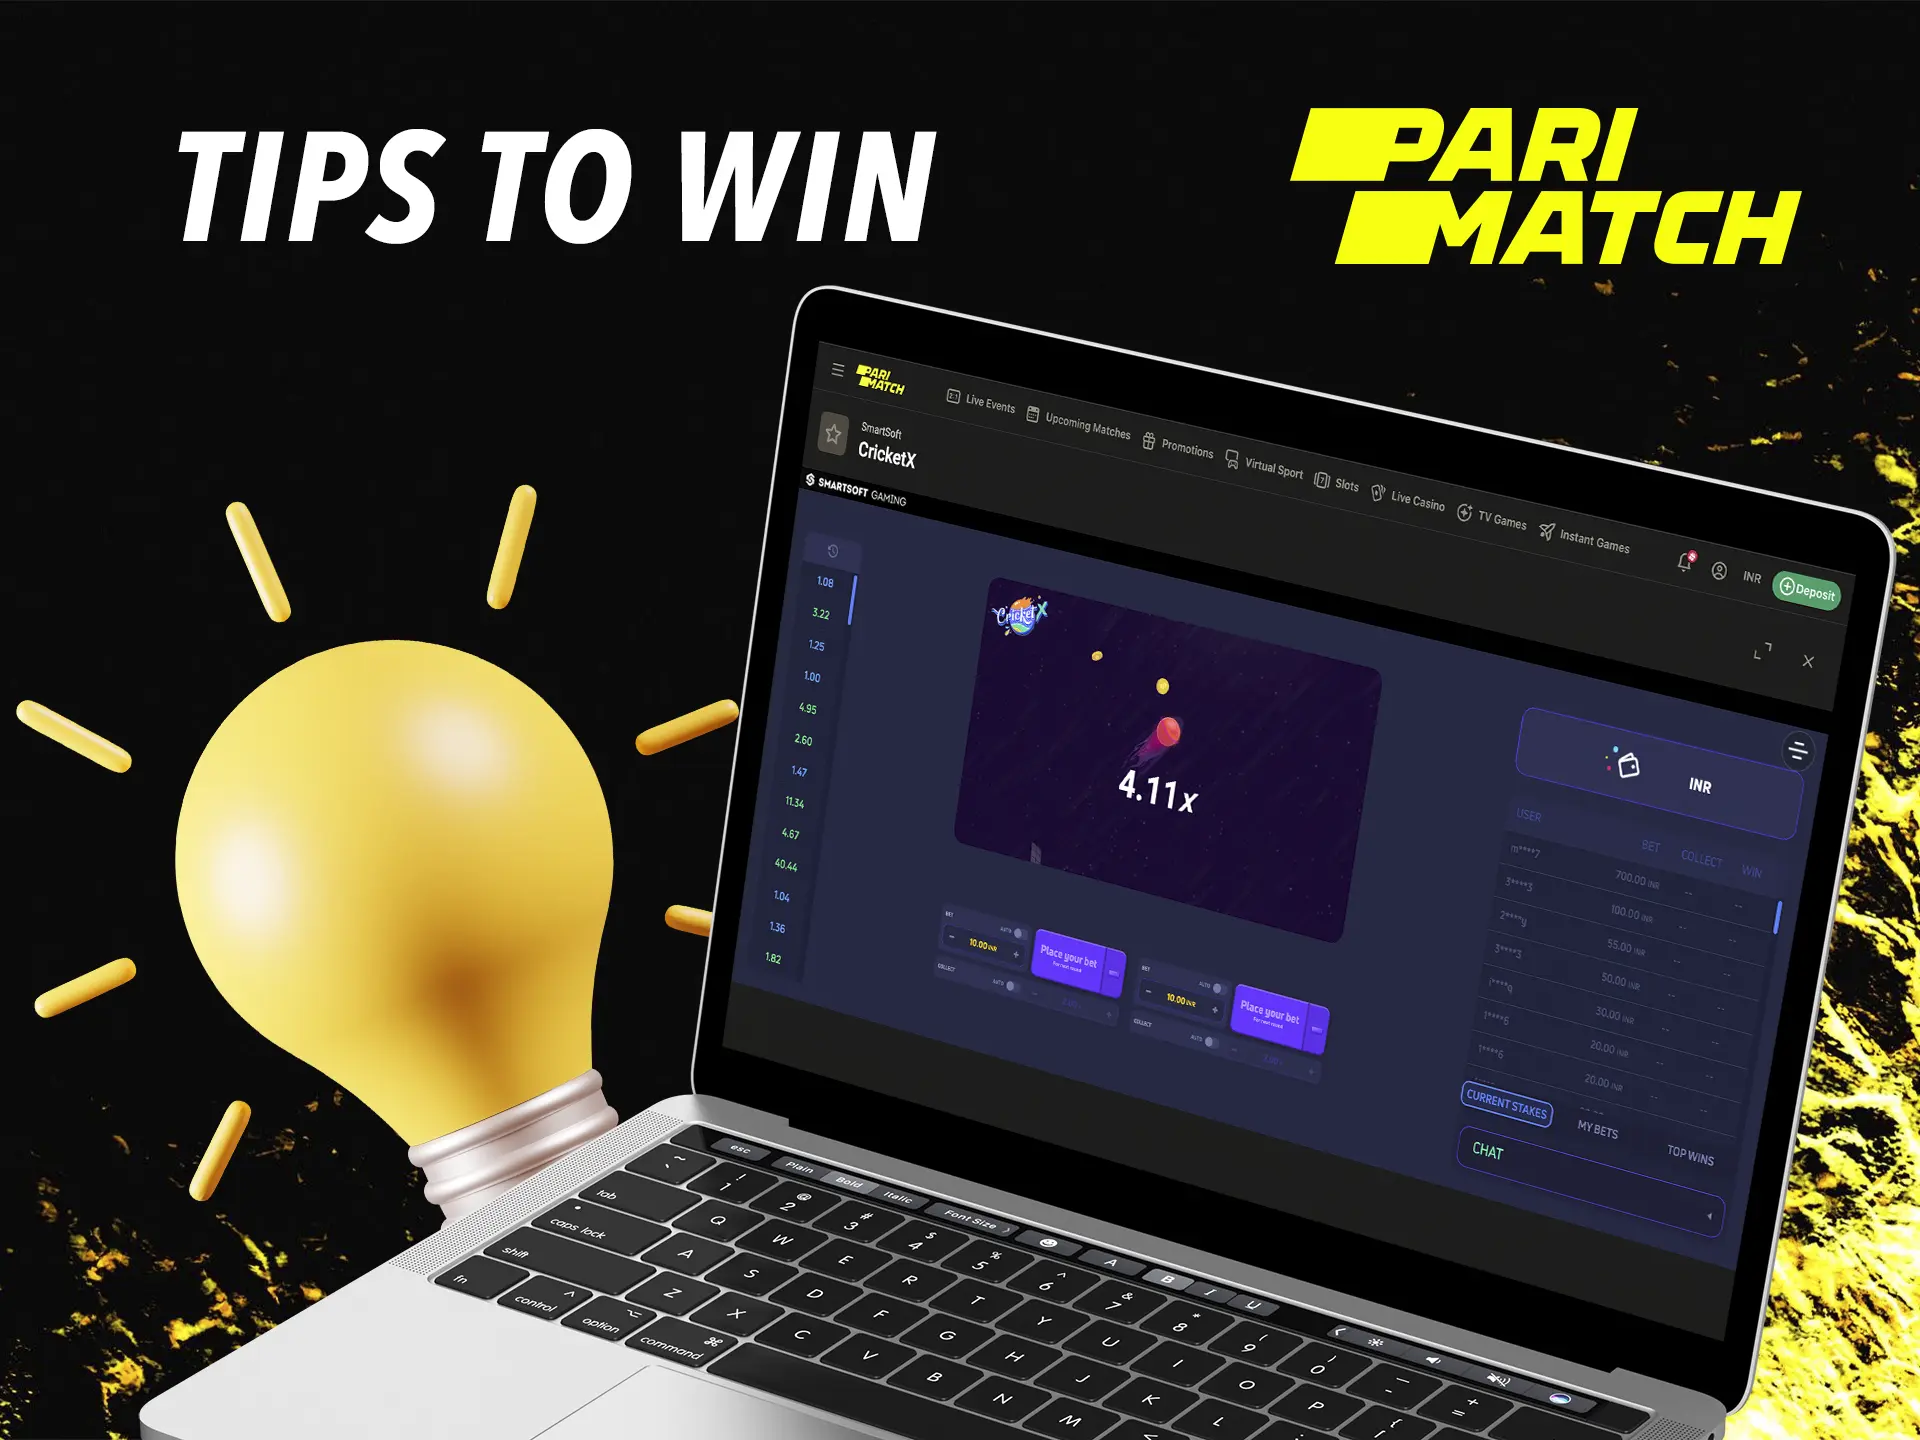 Use your skills and prowess to regularly achieve big wins in the Cricket X game from Parimatch Casino.